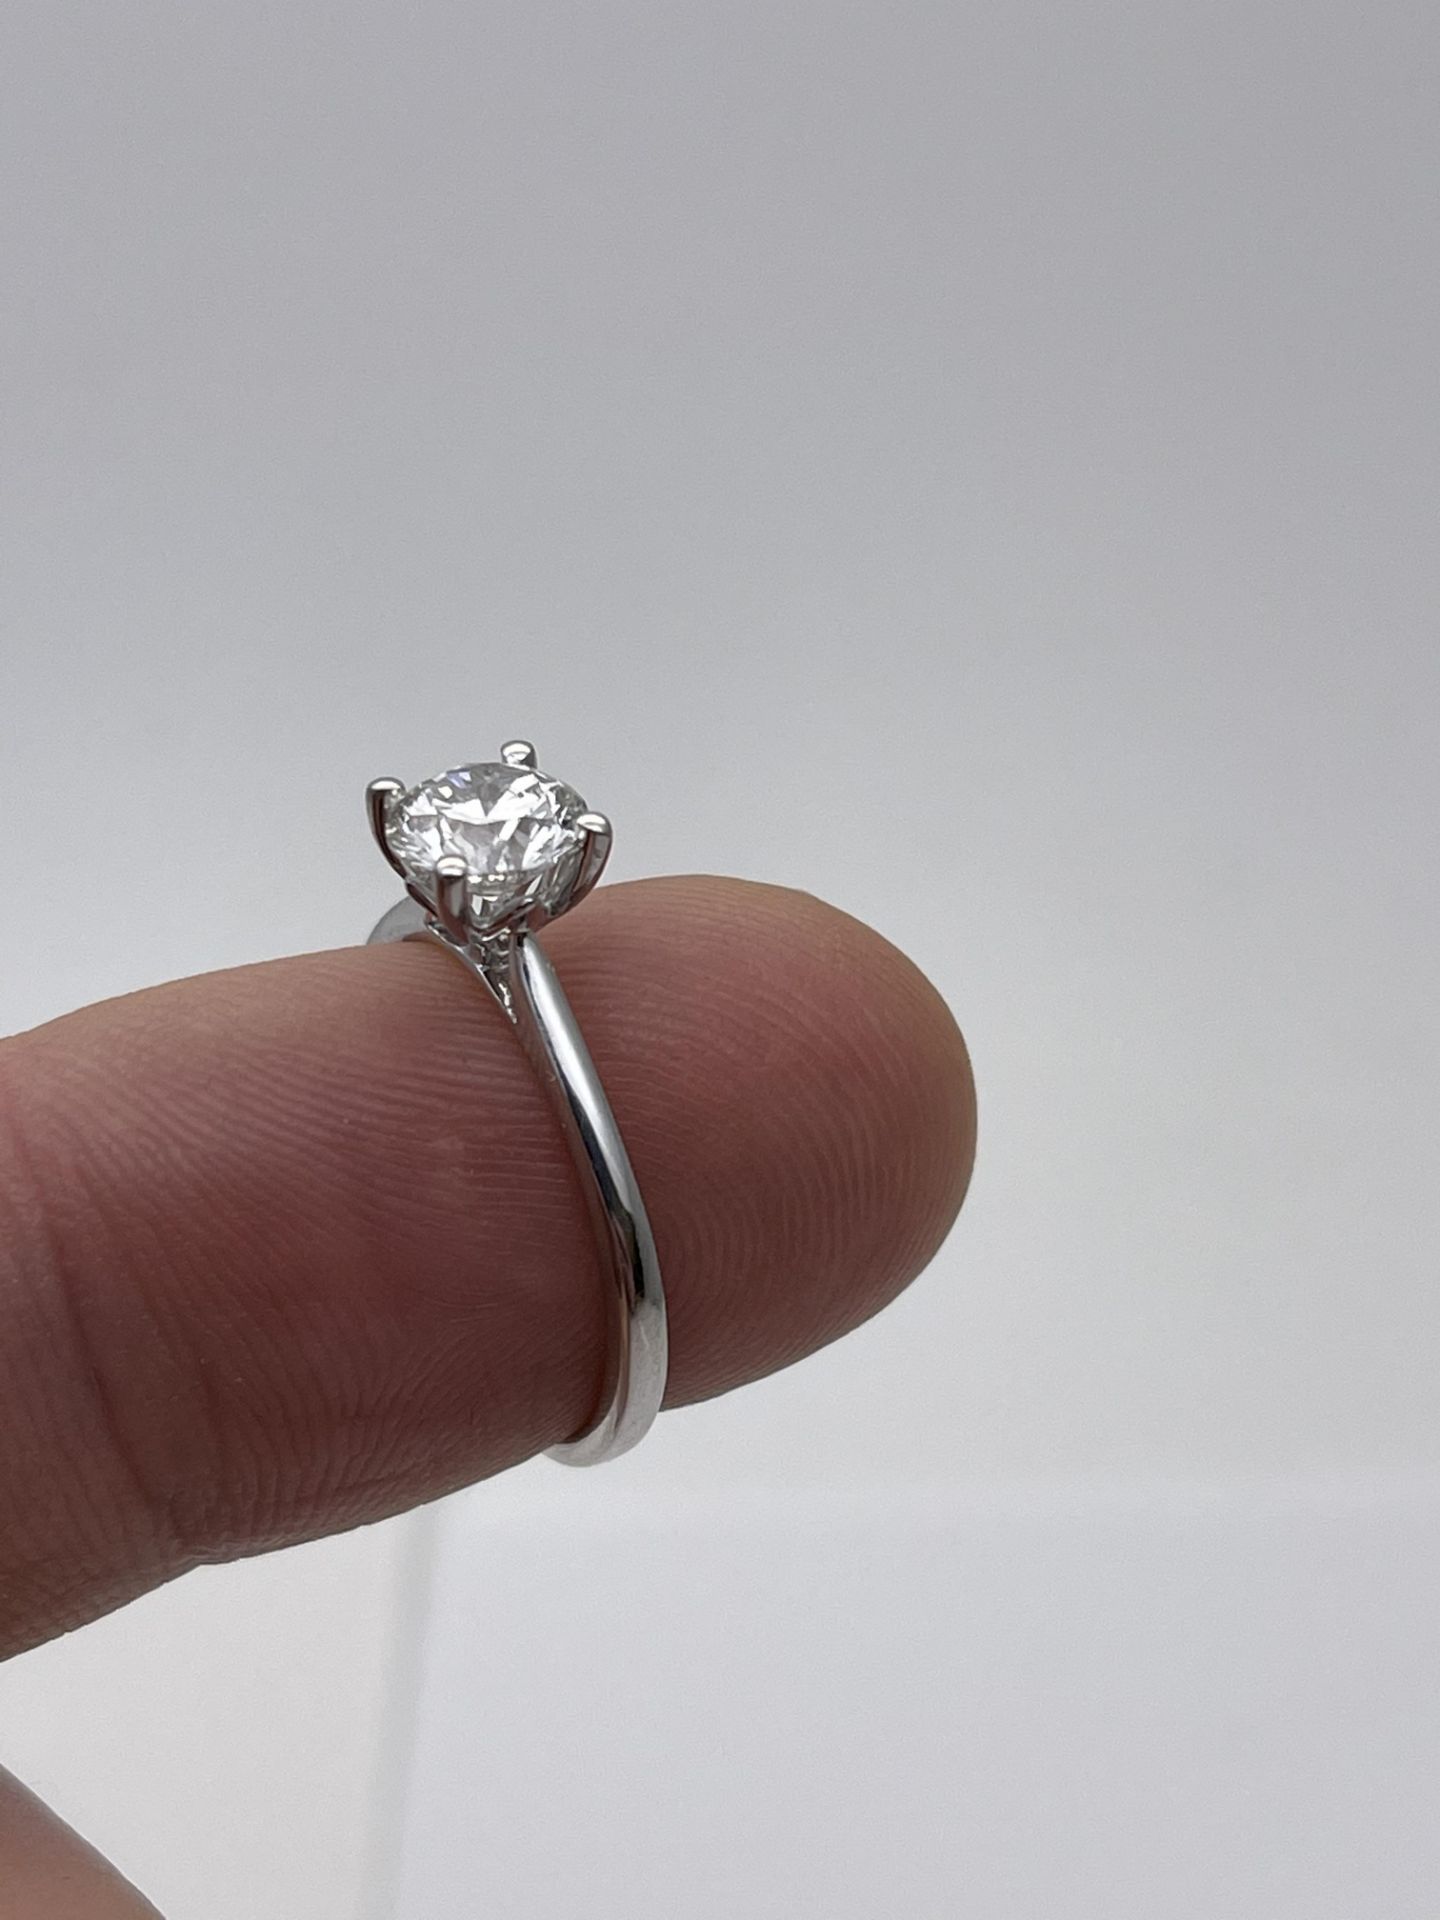 ***£11,895.00*** GIA ACCREDITED ROUND CUT DIAMOND RING, SI1, G, INCLUDES GIA & AGI, 1.00CT - Image 3 of 4